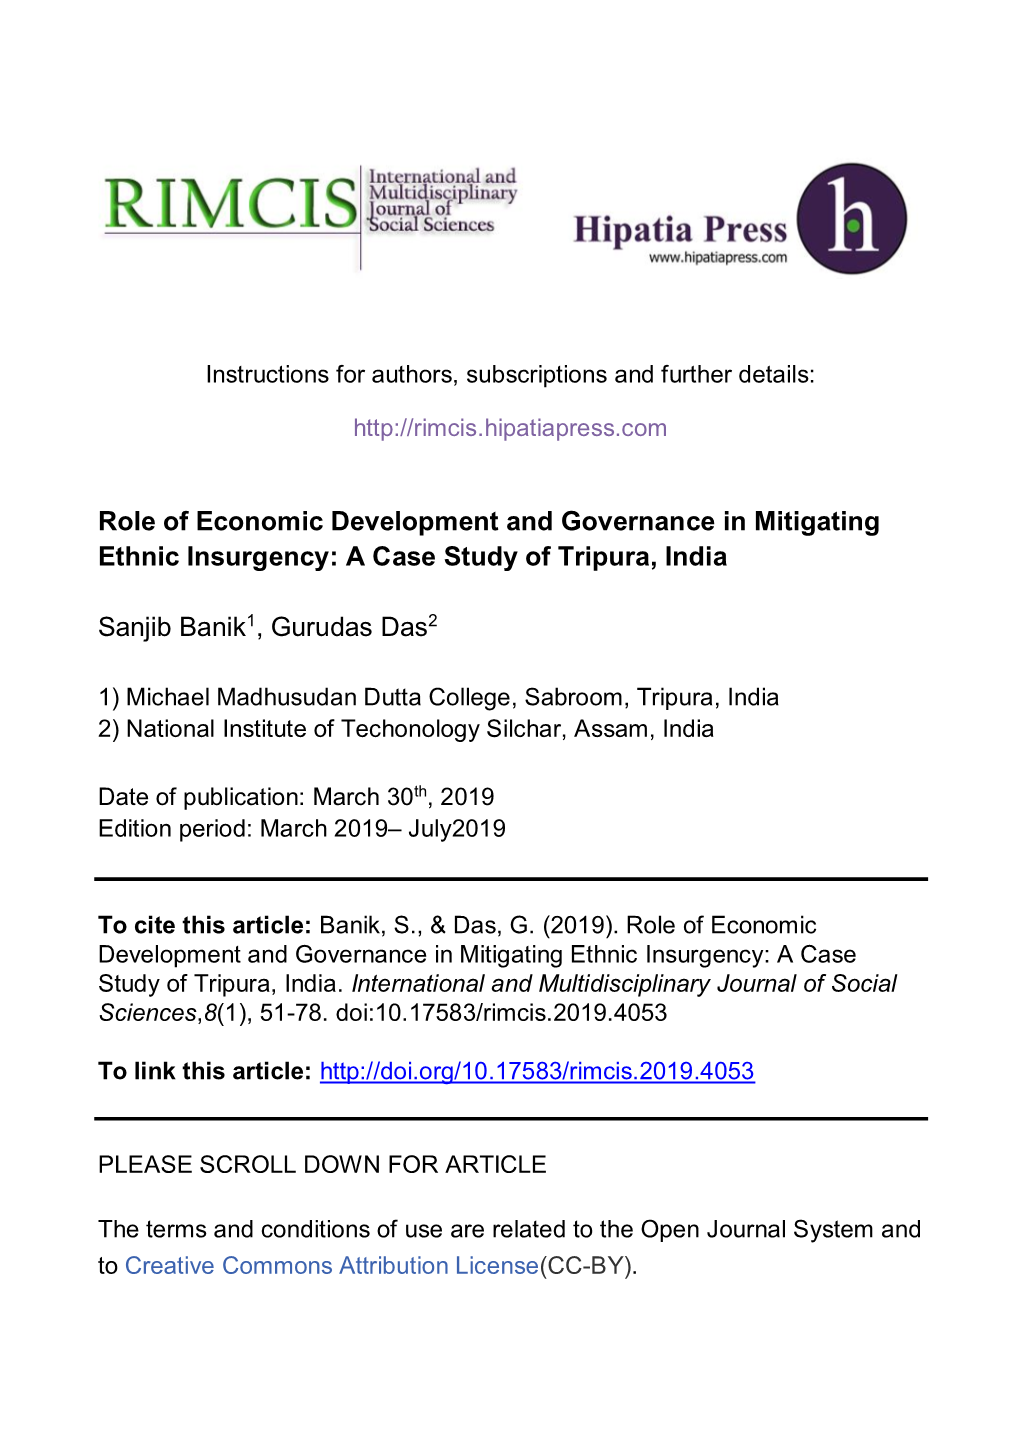 Role of Economic Development and Governance in Mitigating Ethnic Insurgency: a Case Study of Tripura, India